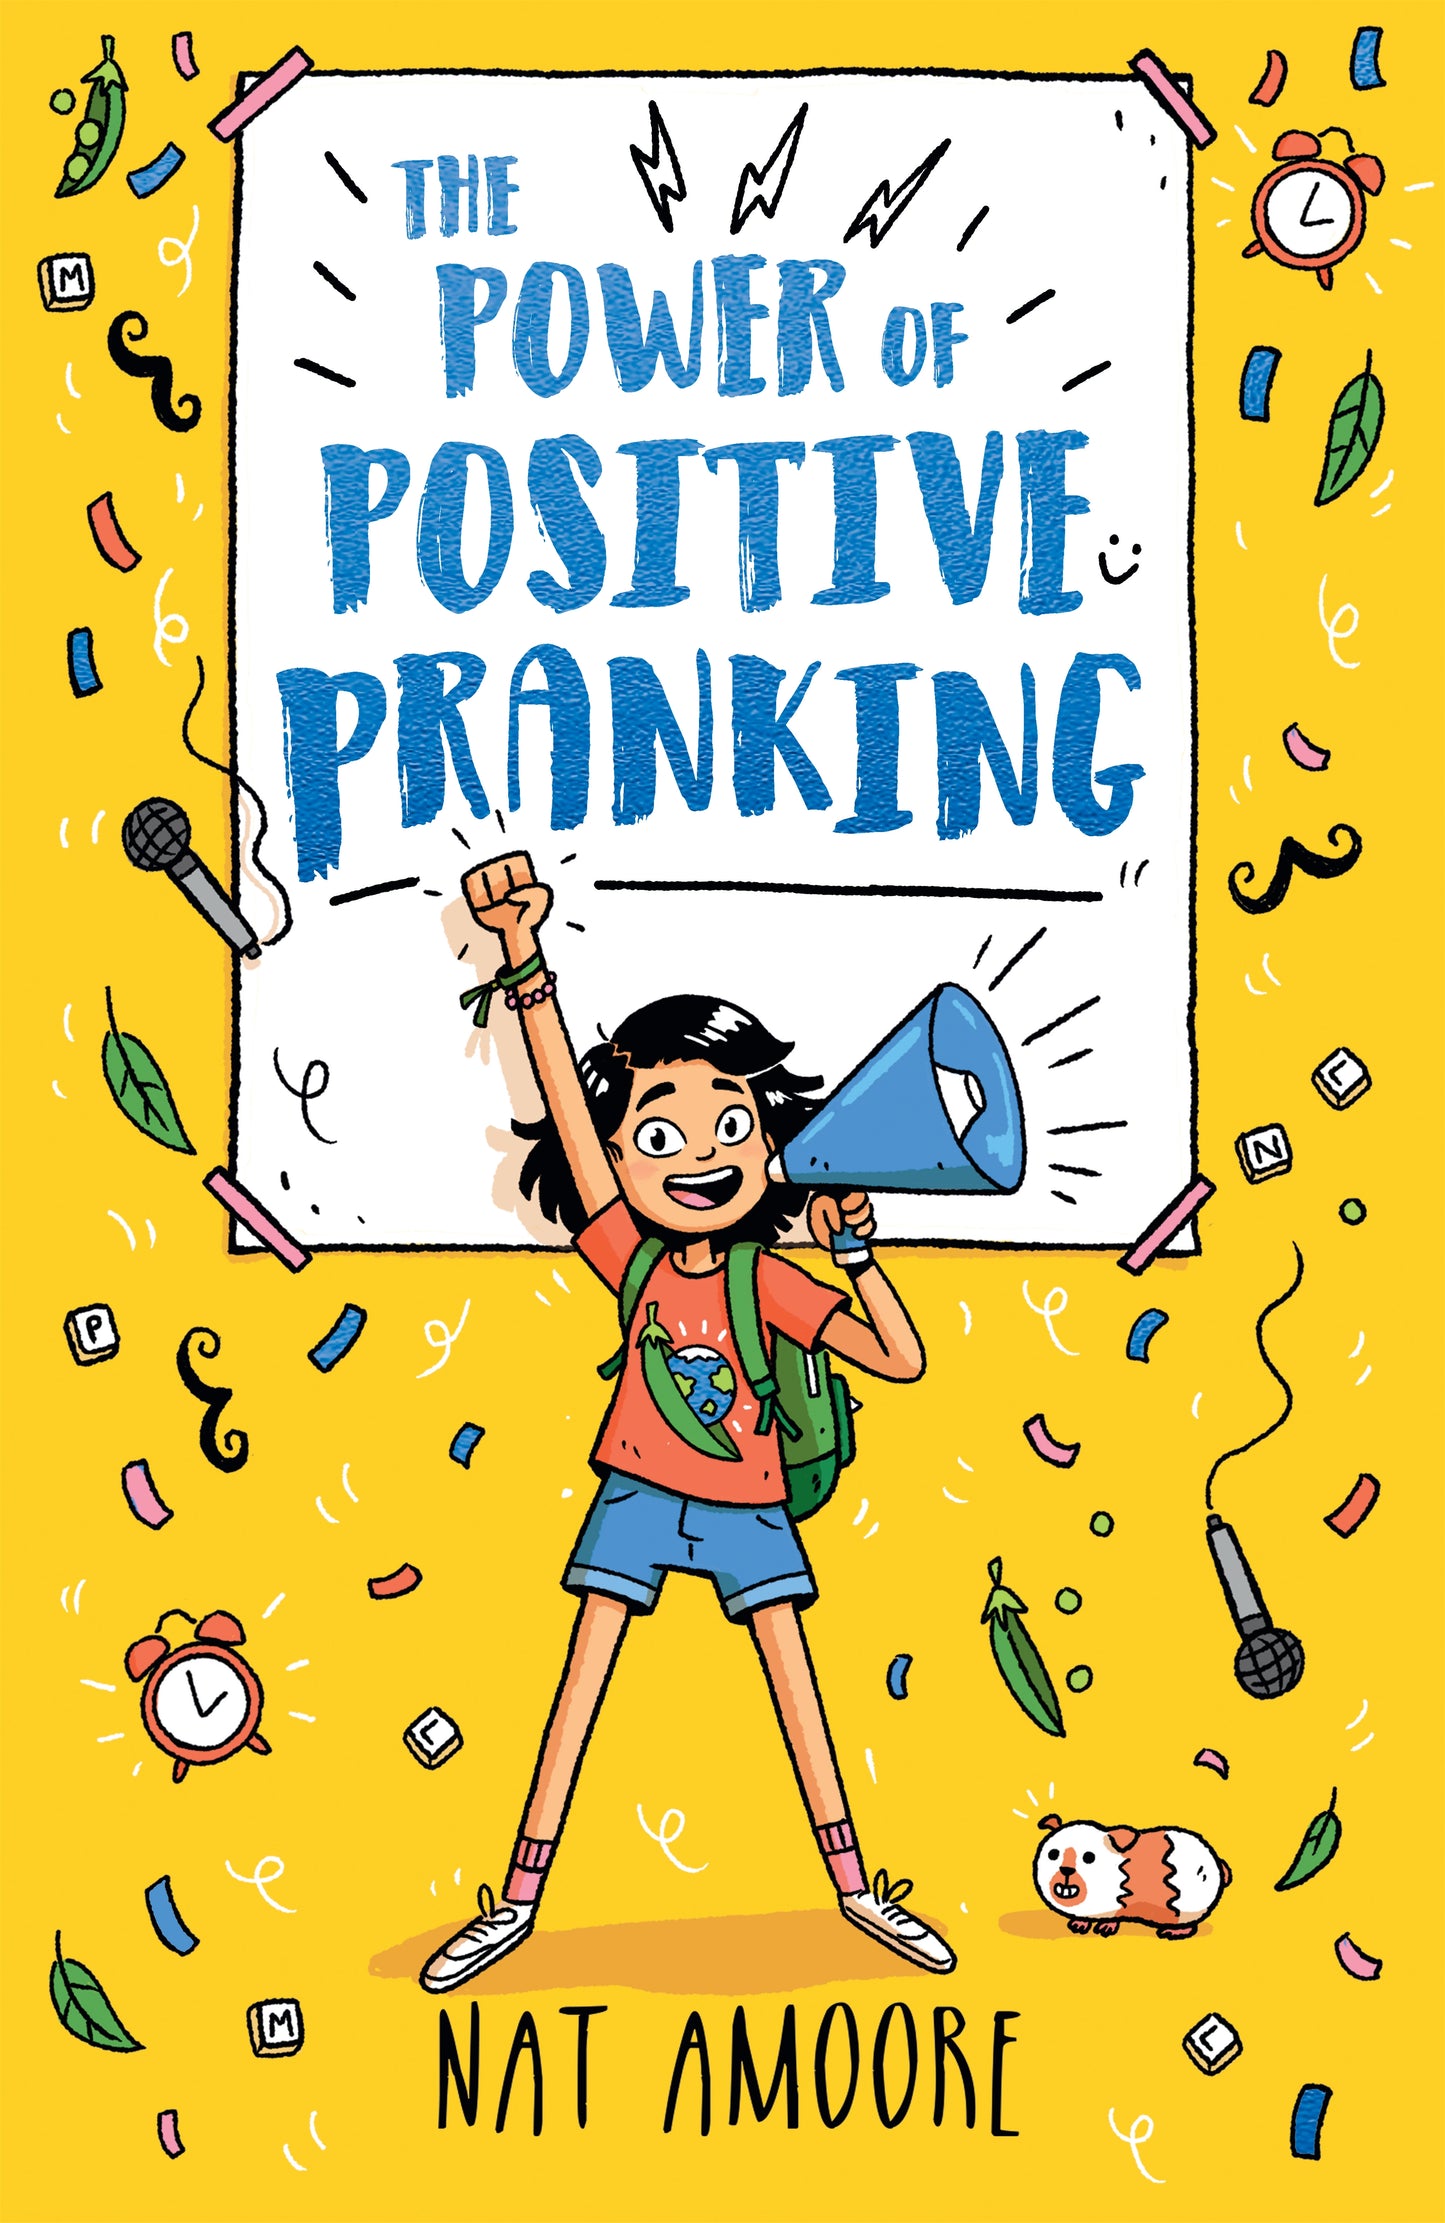 The Power of Positive Pranking by Nat Amoore